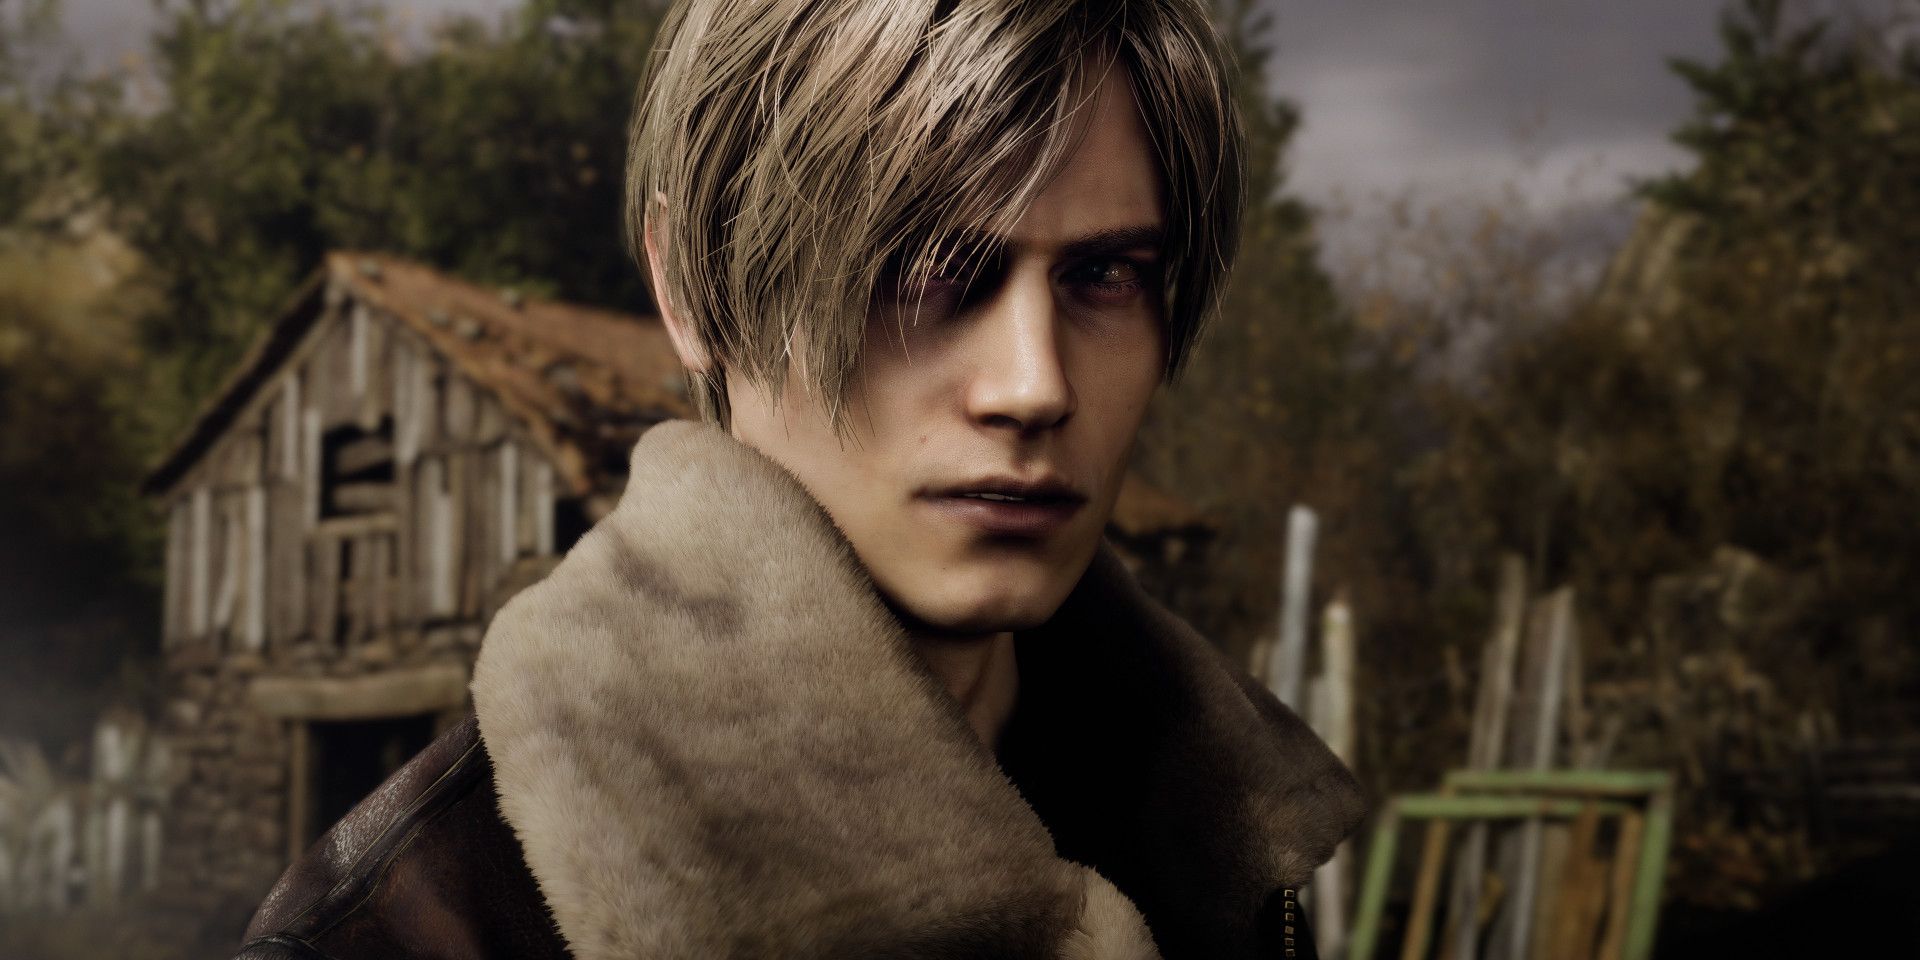 Resident Evil 4 Remake's Leon looks towards something off-screen, close to the camera's angle. Behind him is a barn and some trees.